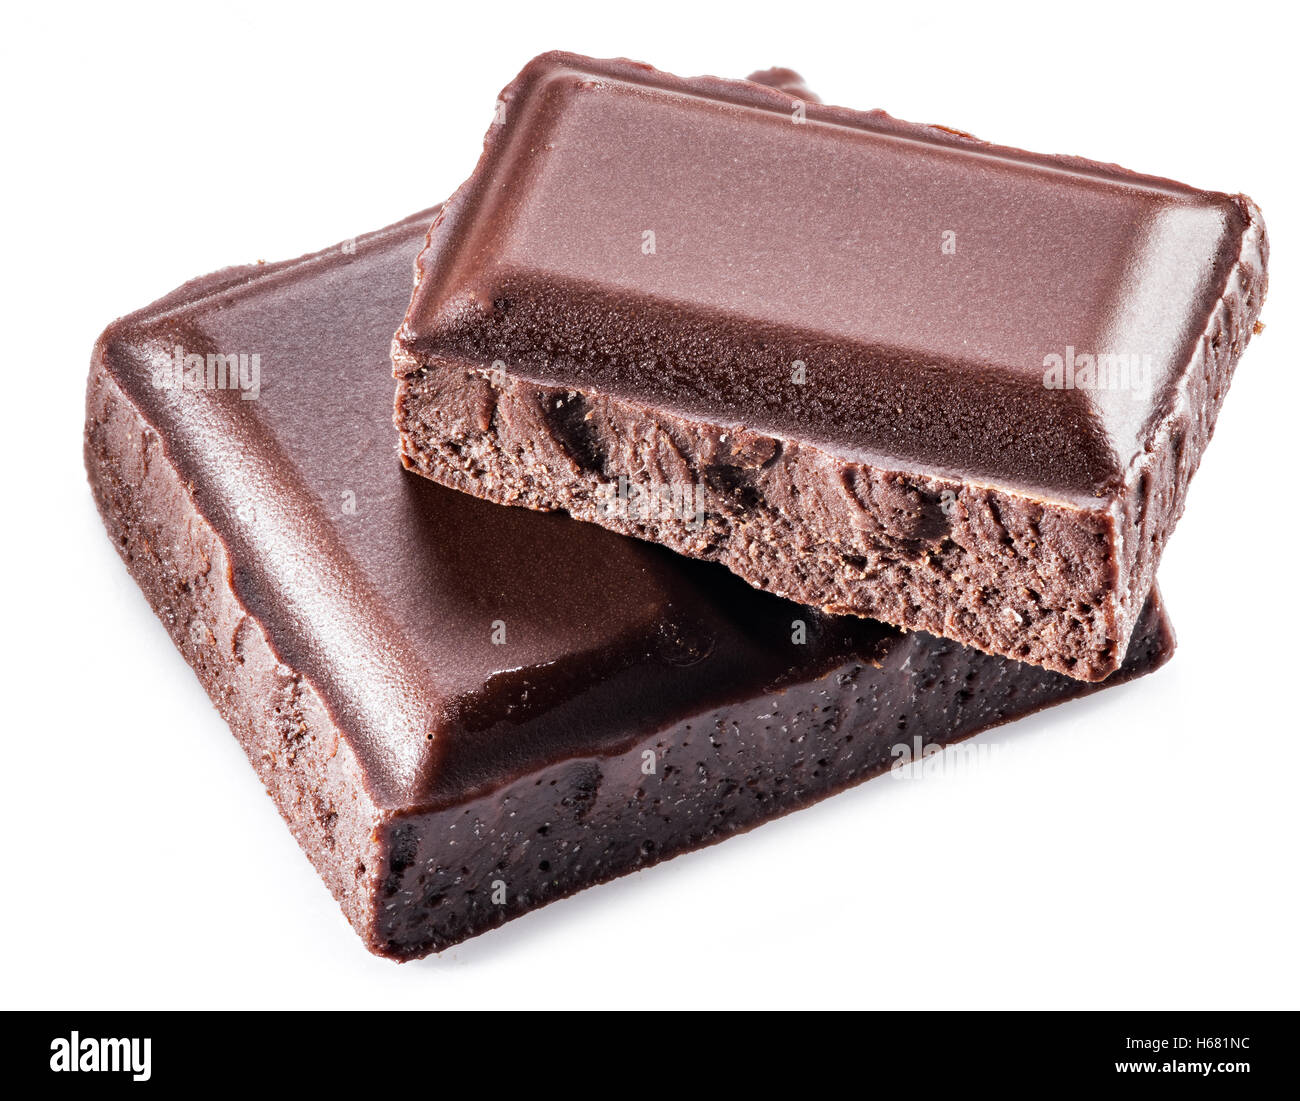 Two pieces of chocolate bar isolated on a white background. Stock Photo